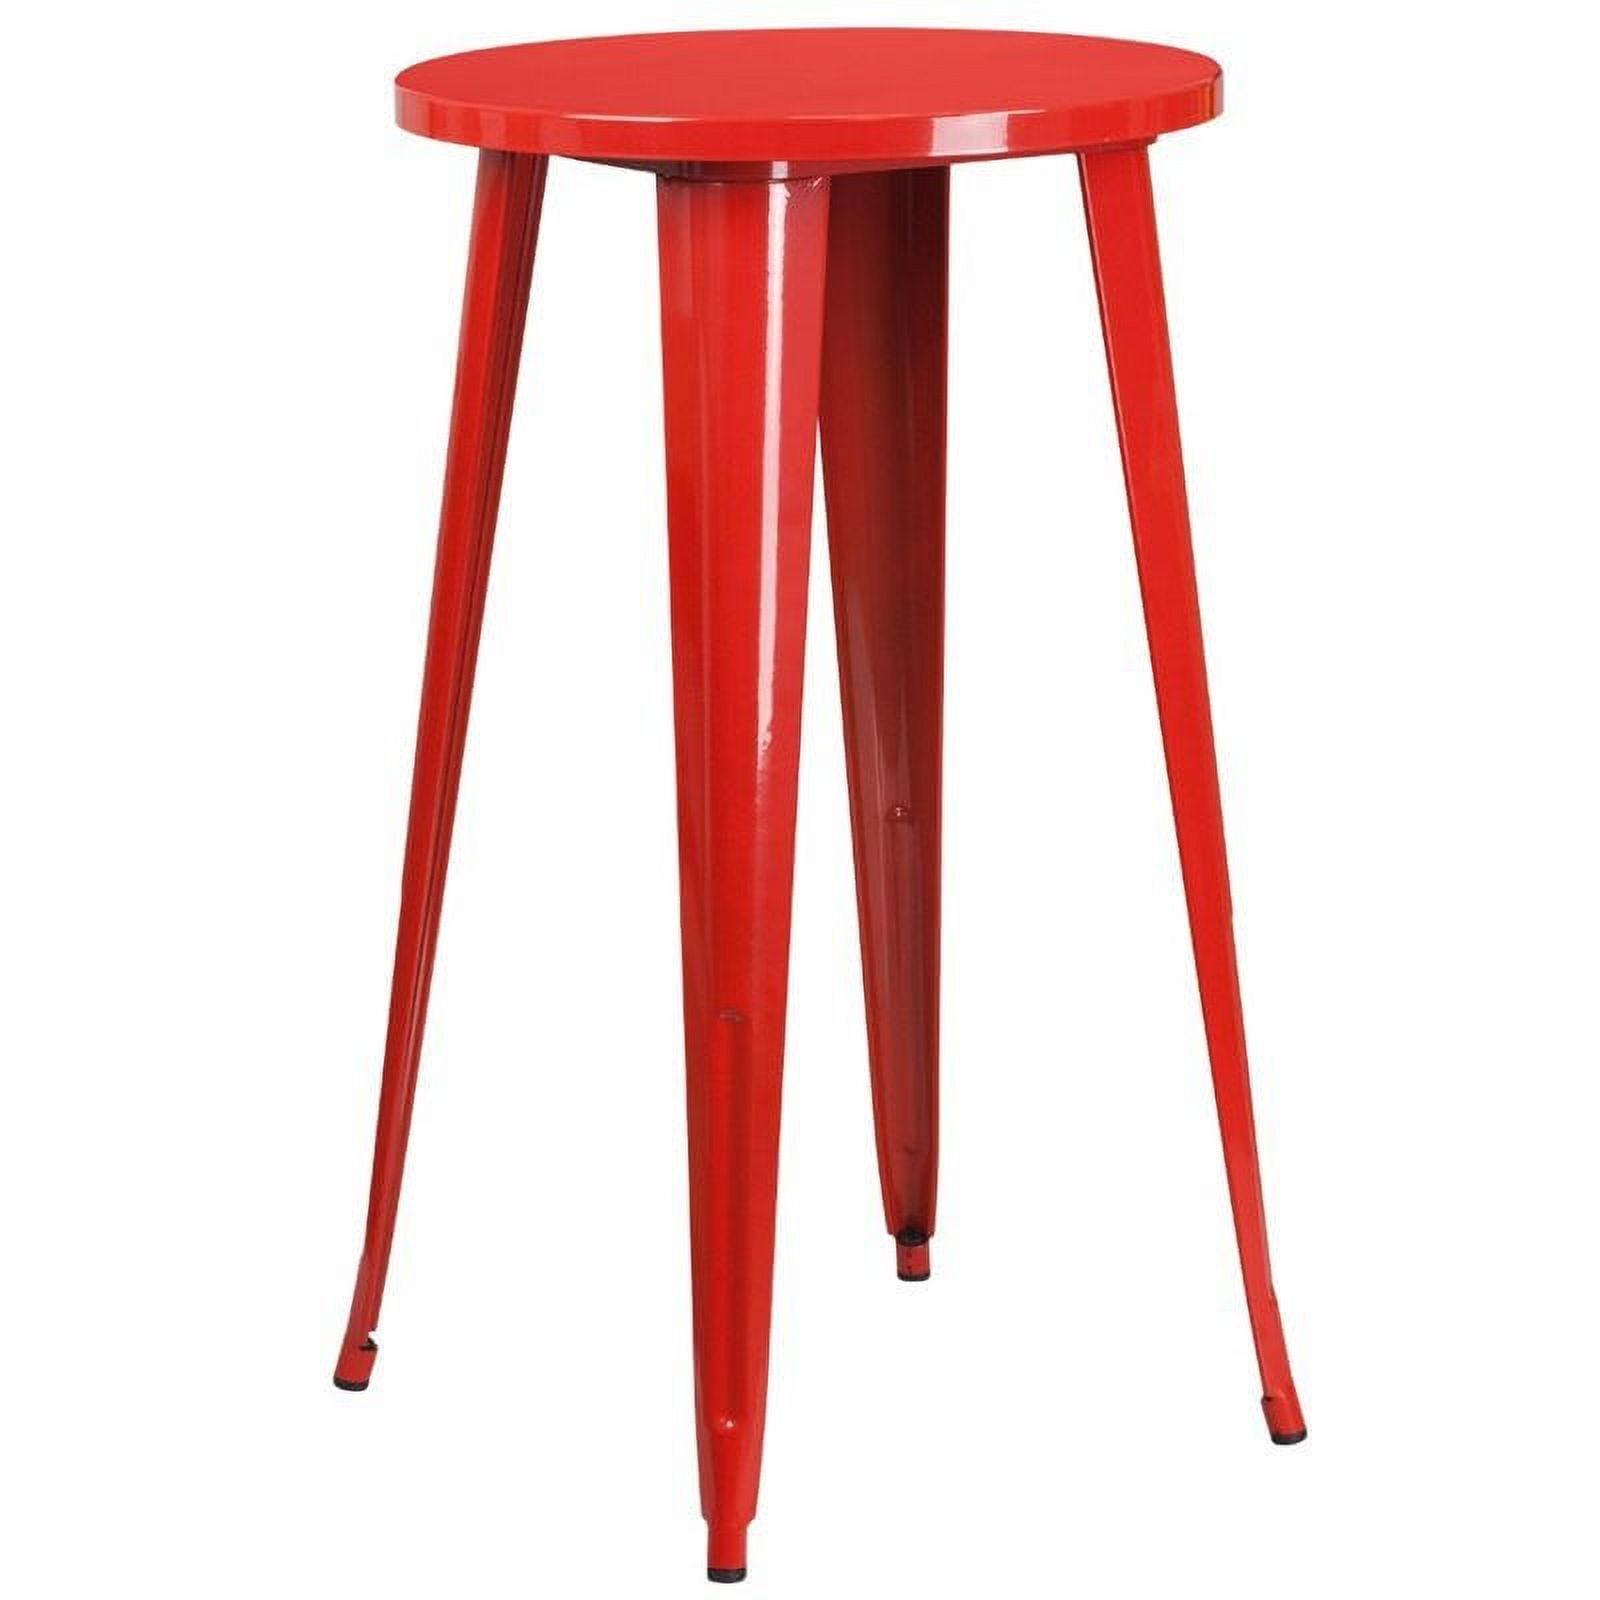 Retro-Industrial Red Metal 41" Bar Table for Indoor/Outdoor Use